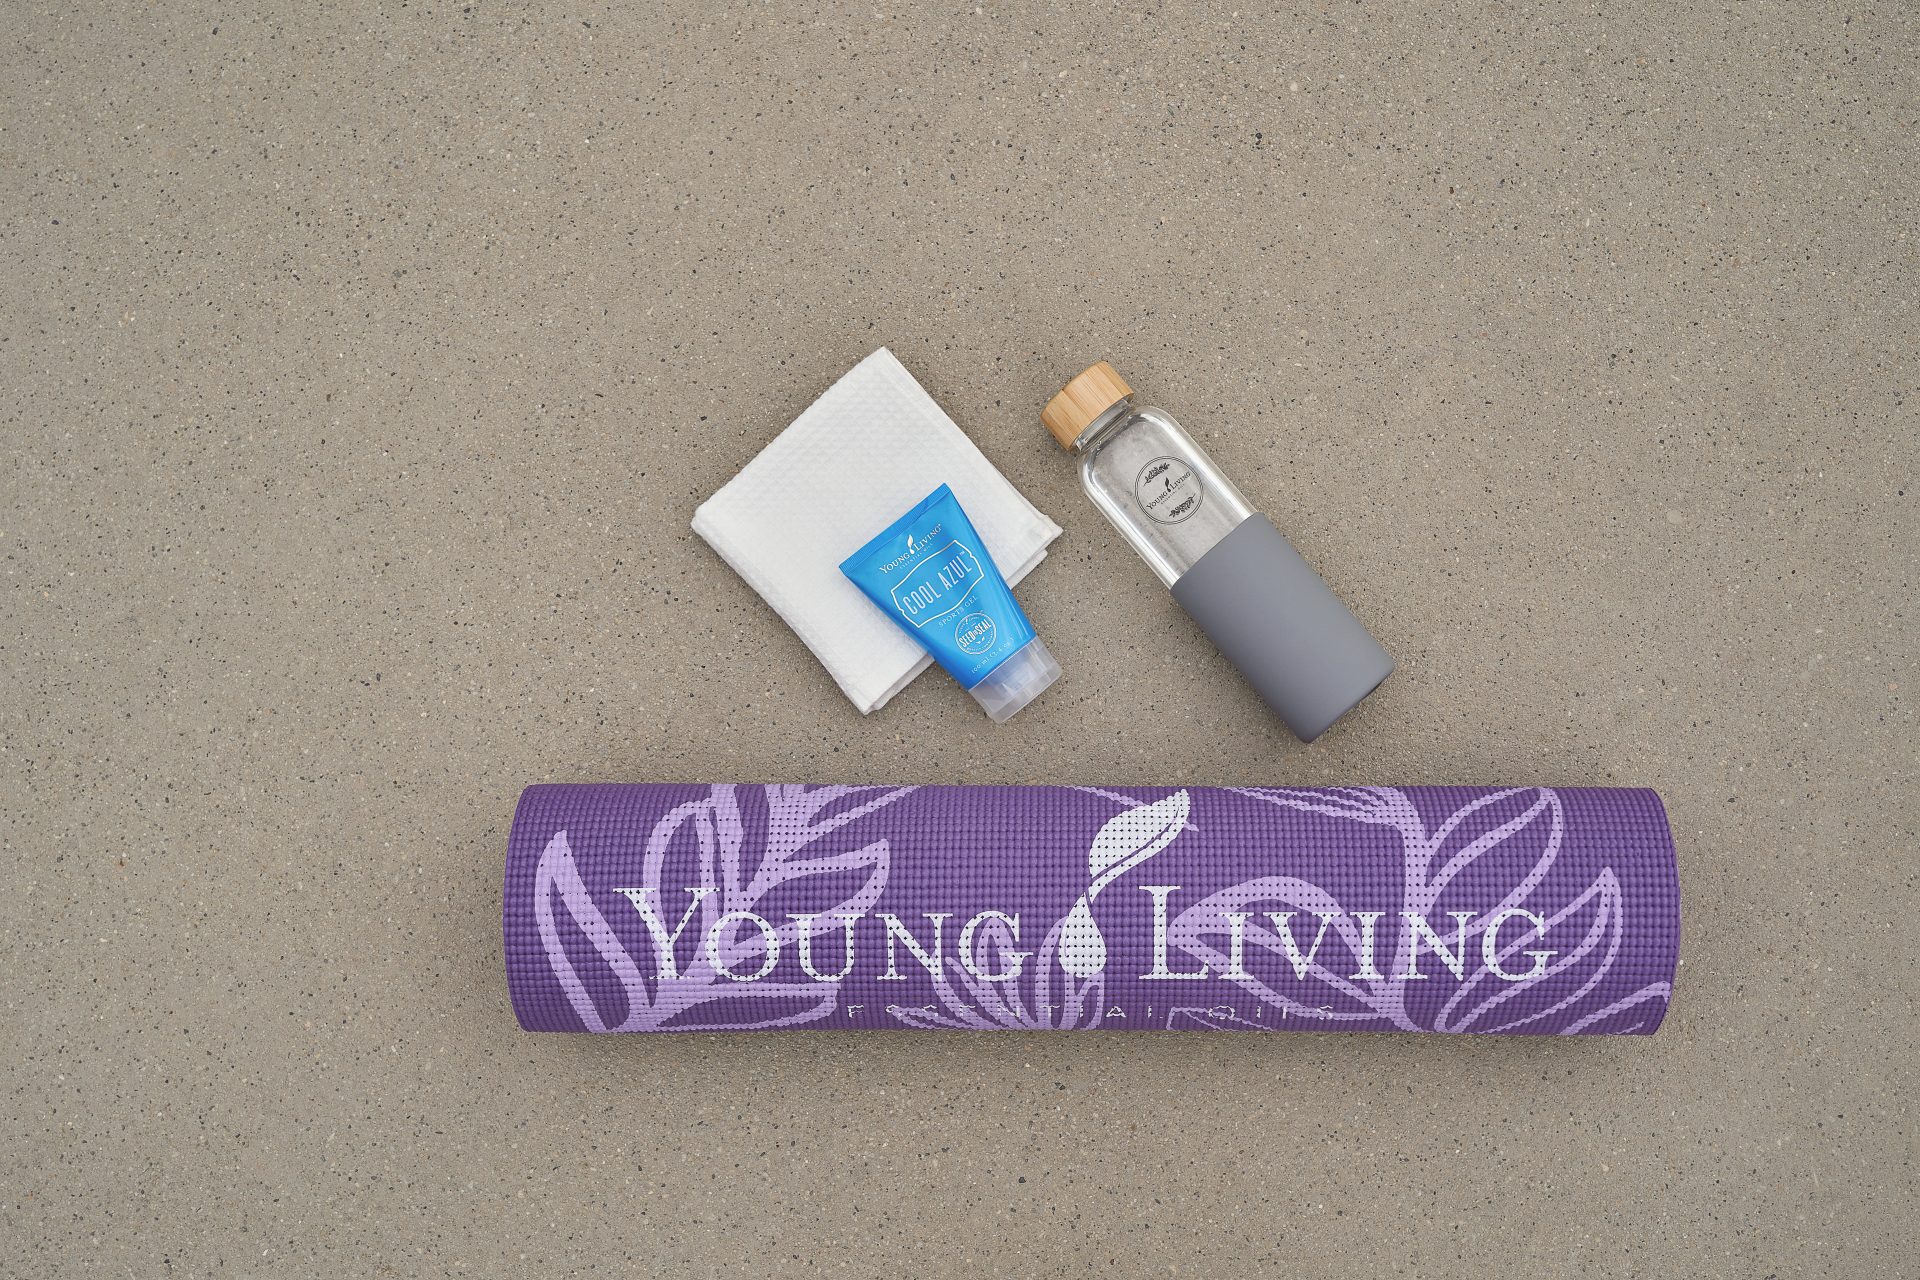 Yoga mat, bottles, and cooling cream